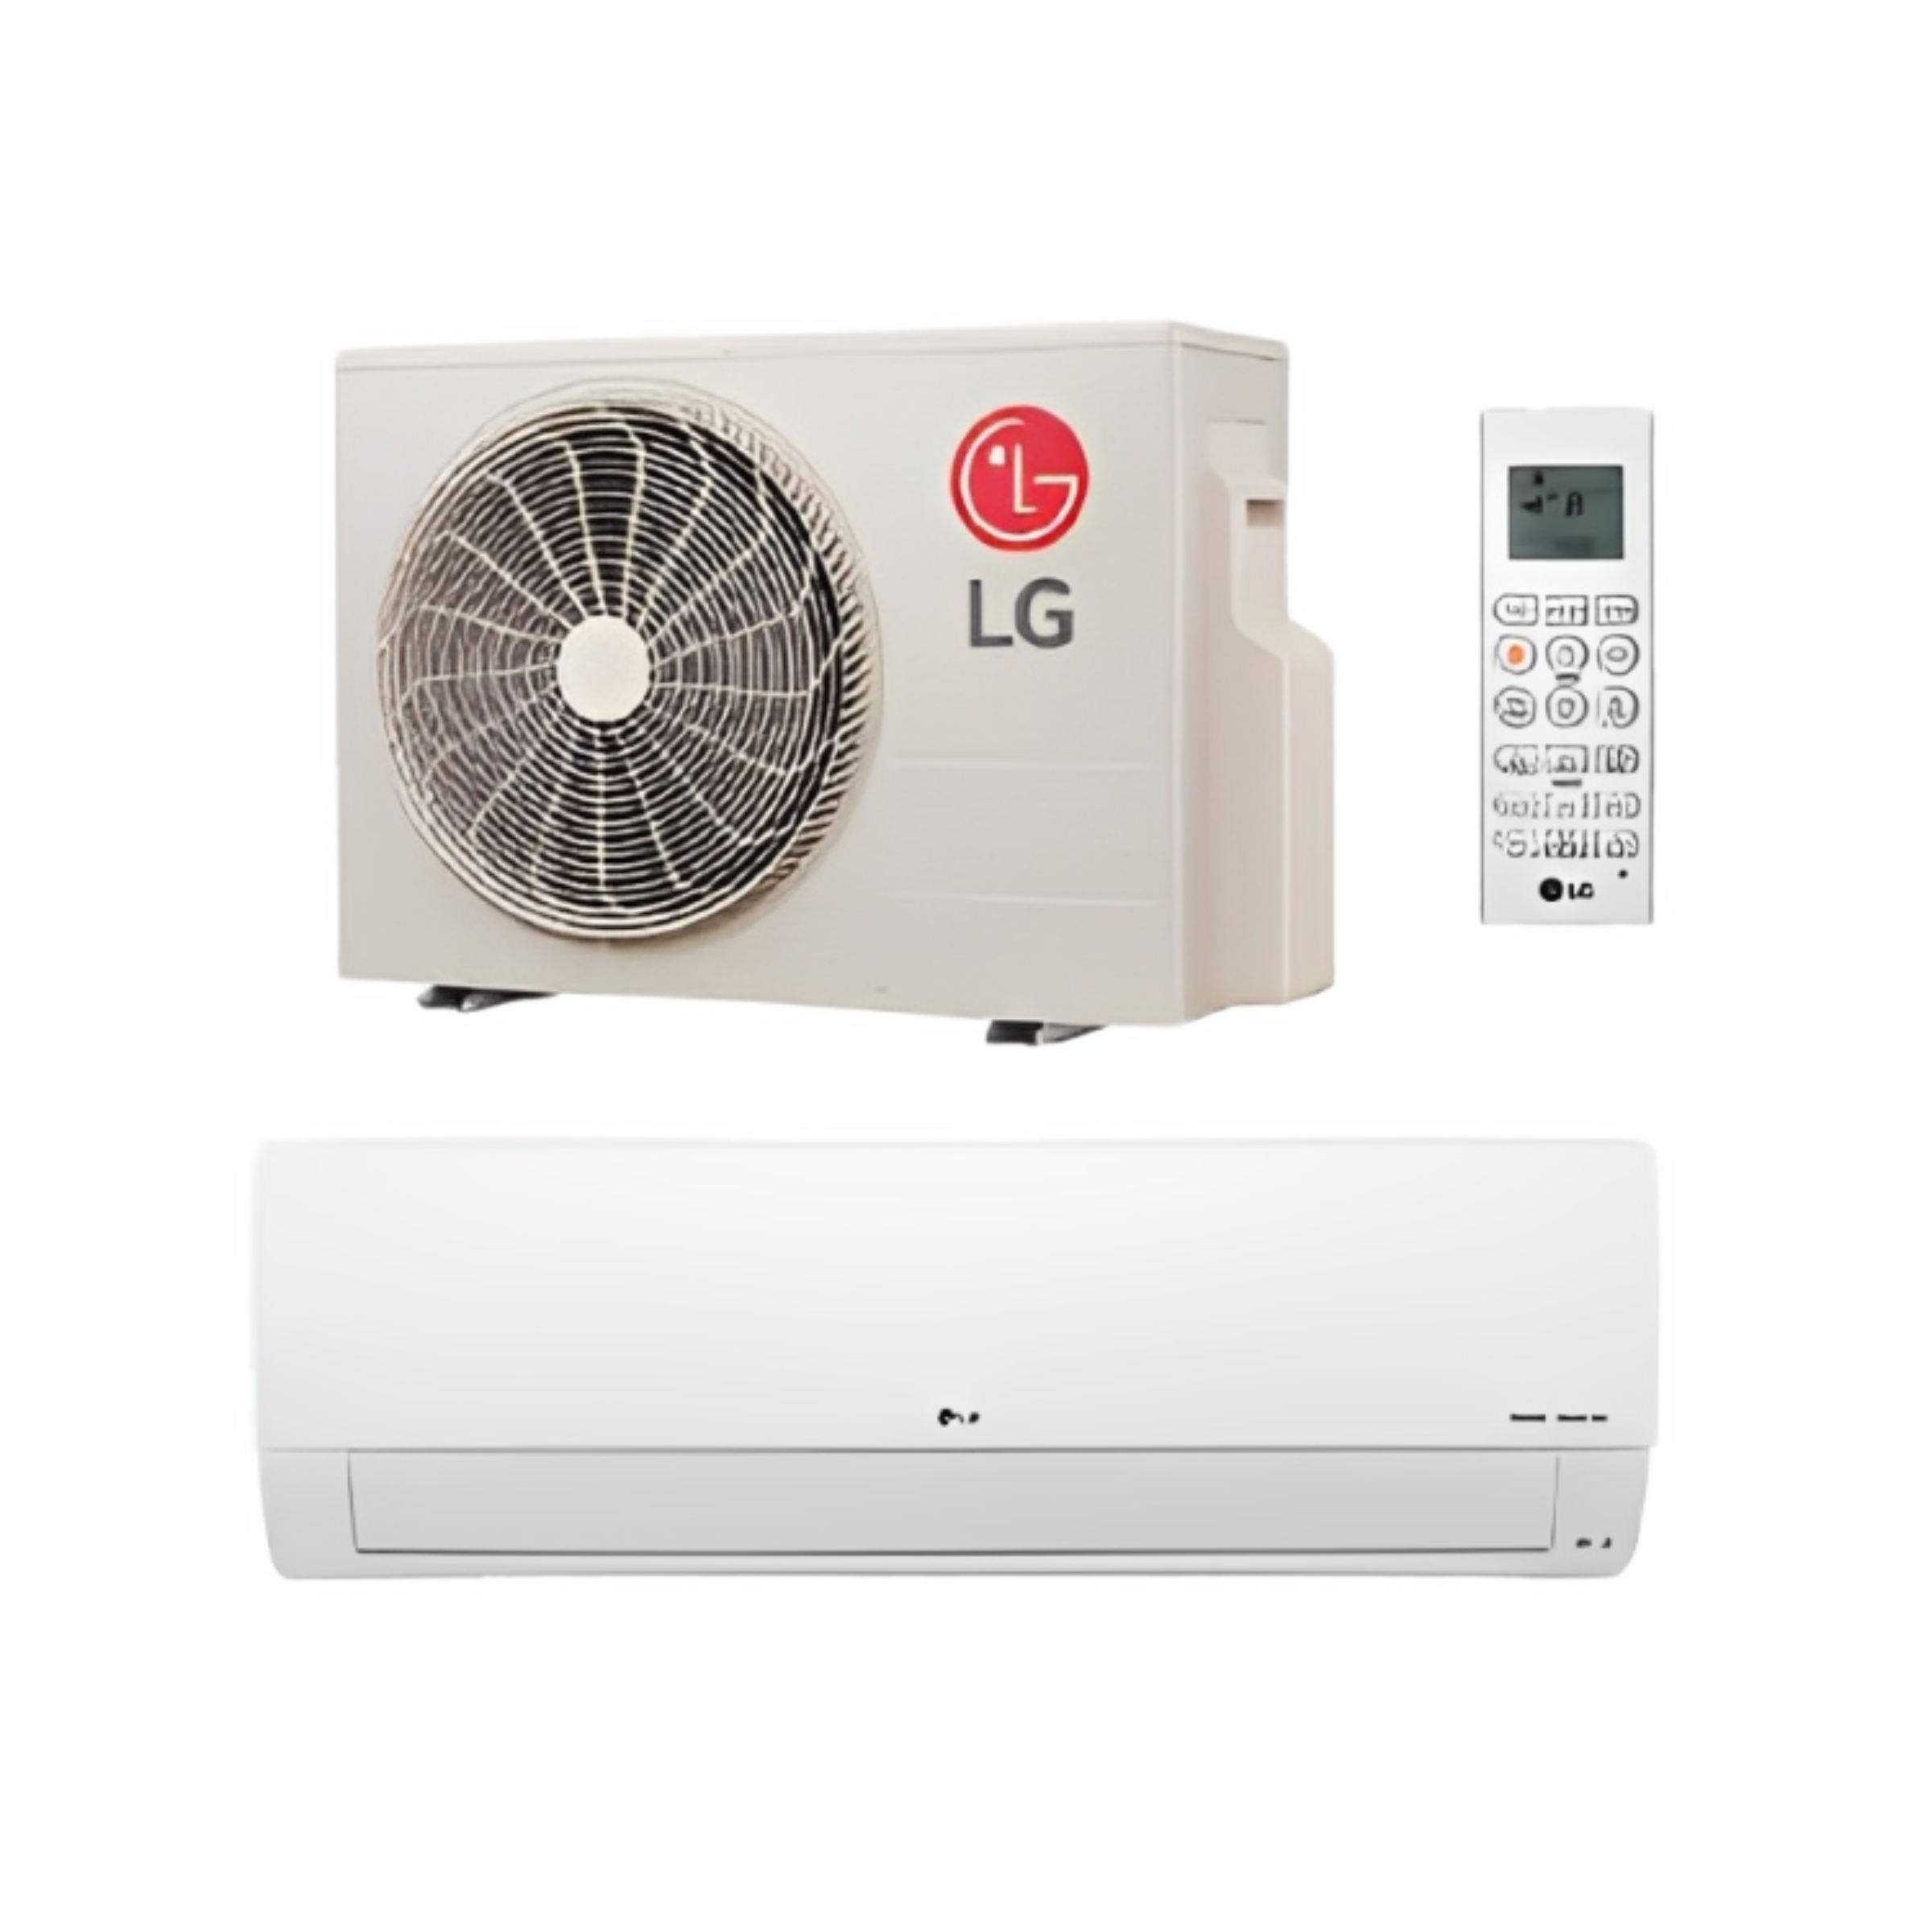 LG HYV3 Series 9,000-24,000 BTU 0.75-2 Ton Single Zone Art Cool Premier Wall Mounted Cooling and Heating Air Conditioning System Outdoor Unit & Indoor/Wall Air Handler Unit, Up to 27.5 SEER